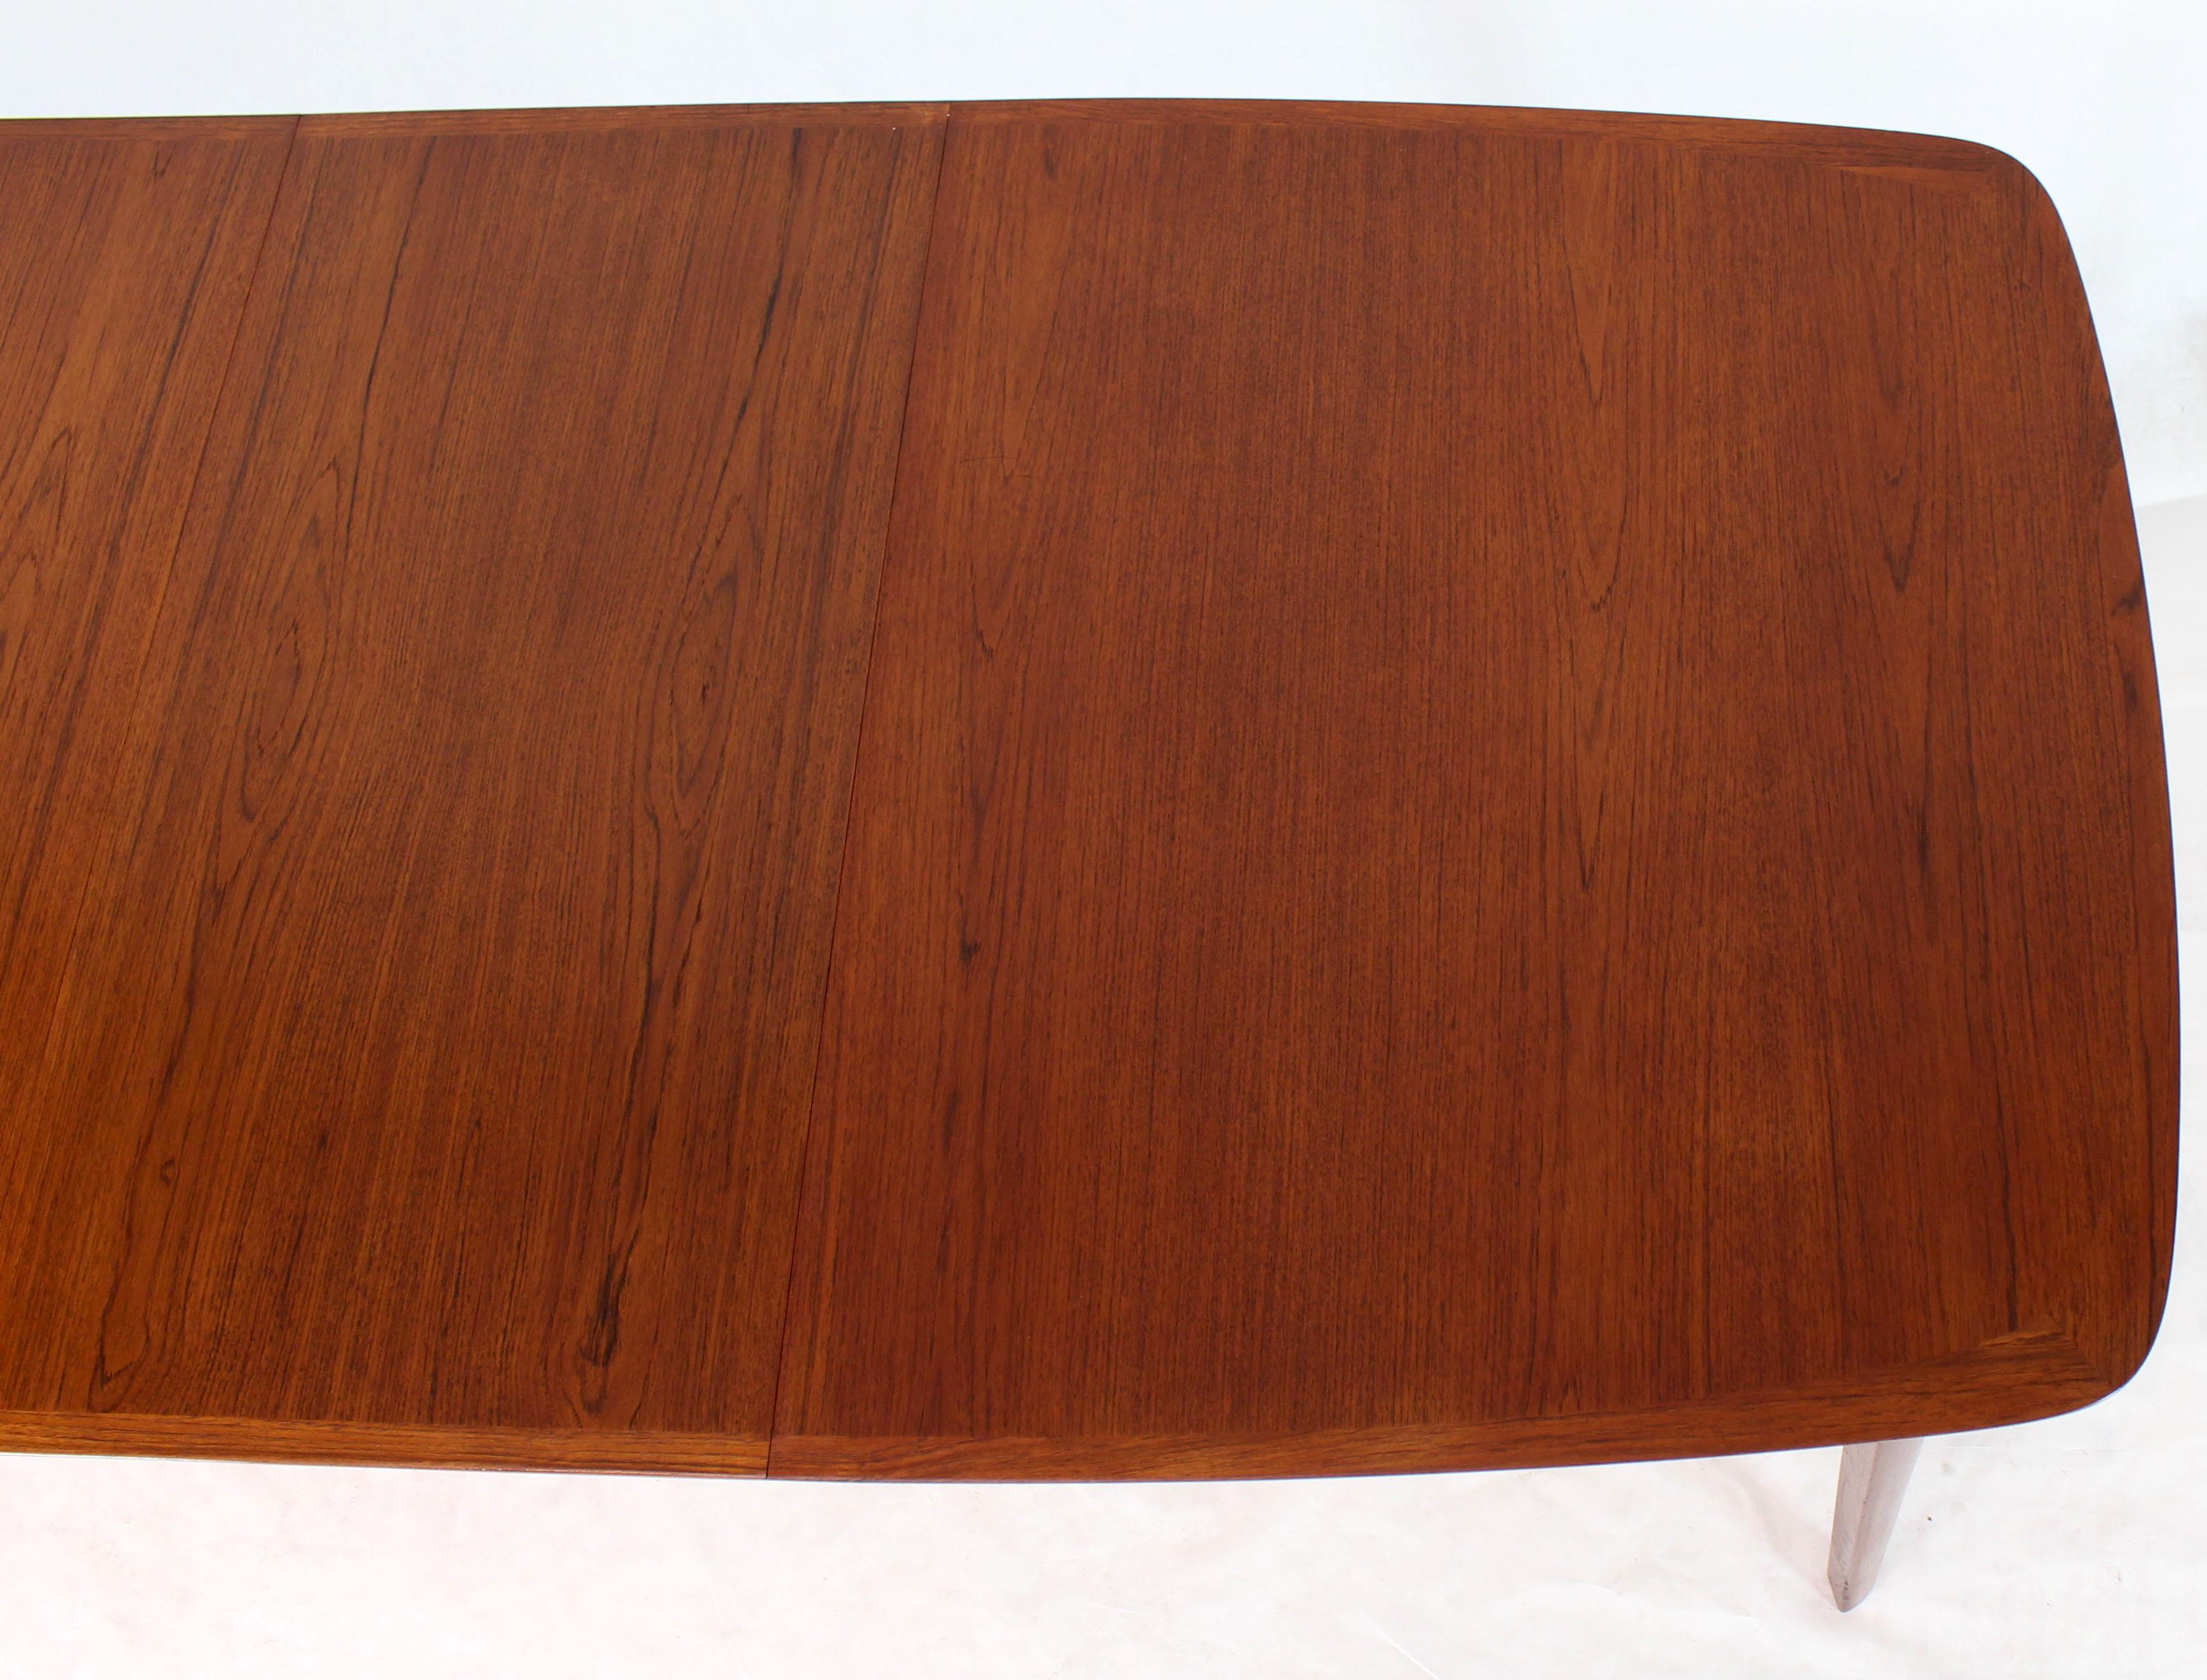 20th Century Danish Teak Mid-Century Modern Dining Banquet Table Self Storing Folding Leafs For Sale